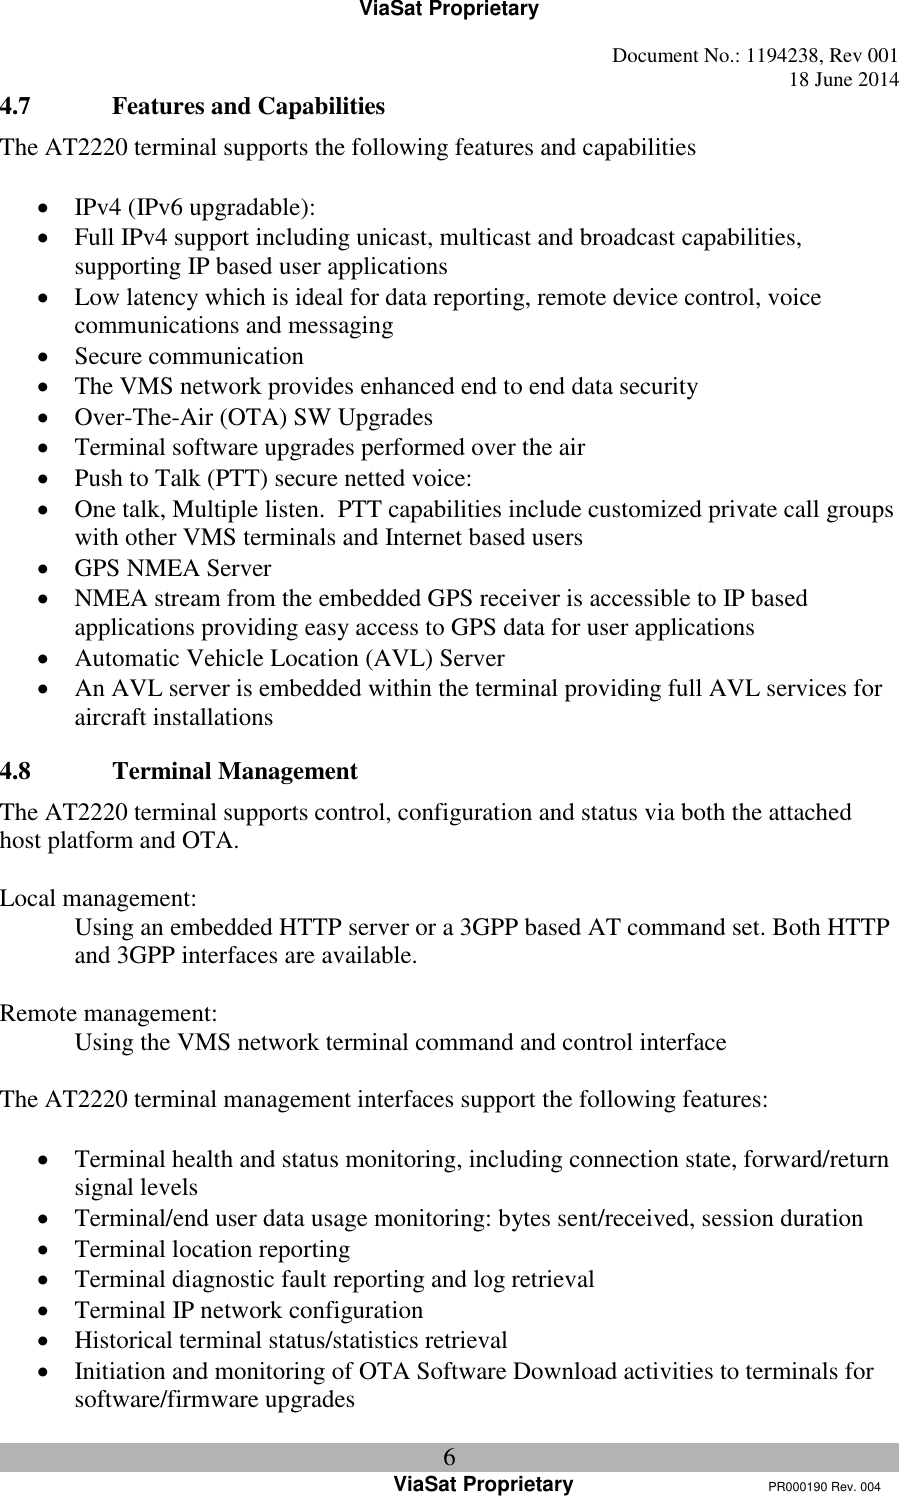 ViaSat Proprietary   Document No.: 1194238, Rev 001  18 June 2014 6 ViaSat Proprietary      PR000190 Rev. 004 4.7 Features and Capabilities The AT2220 terminal supports the following features and capabilities   IPv4 (IPv6 upgradable):  Full IPv4 support including unicast, multicast and broadcast capabilities, supporting IP based user applications    Low latency which is ideal for data reporting, remote device control, voice communications and messaging  Secure communication  The VMS network provides enhanced end to end data security  Over-The-Air (OTA) SW Upgrades    Terminal software upgrades performed over the air  Push to Talk (PTT) secure netted voice:  One talk, Multiple listen.  PTT capabilities include customized private call groups with other VMS terminals and Internet based users       GPS NMEA Server    NMEA stream from the embedded GPS receiver is accessible to IP based applications providing easy access to GPS data for user applications  Automatic Vehicle Location (AVL) Server    An AVL server is embedded within the terminal providing full AVL services for aircraft installations 4.8 Terminal Management The AT2220 terminal supports control, configuration and status via both the attached host platform and OTA.  Local management: Using an embedded HTTP server or a 3GPP based AT command set. Both HTTP and 3GPP interfaces are available.  Remote management: Using the VMS network terminal command and control interface  The AT2220 terminal management interfaces support the following features:   Terminal health and status monitoring, including connection state, forward/return signal levels  Terminal/end user data usage monitoring: bytes sent/received, session duration  Terminal location reporting  Terminal diagnostic fault reporting and log retrieval  Terminal IP network configuration  Historical terminal status/statistics retrieval  Initiation and monitoring of OTA Software Download activities to terminals for software/firmware upgrades 